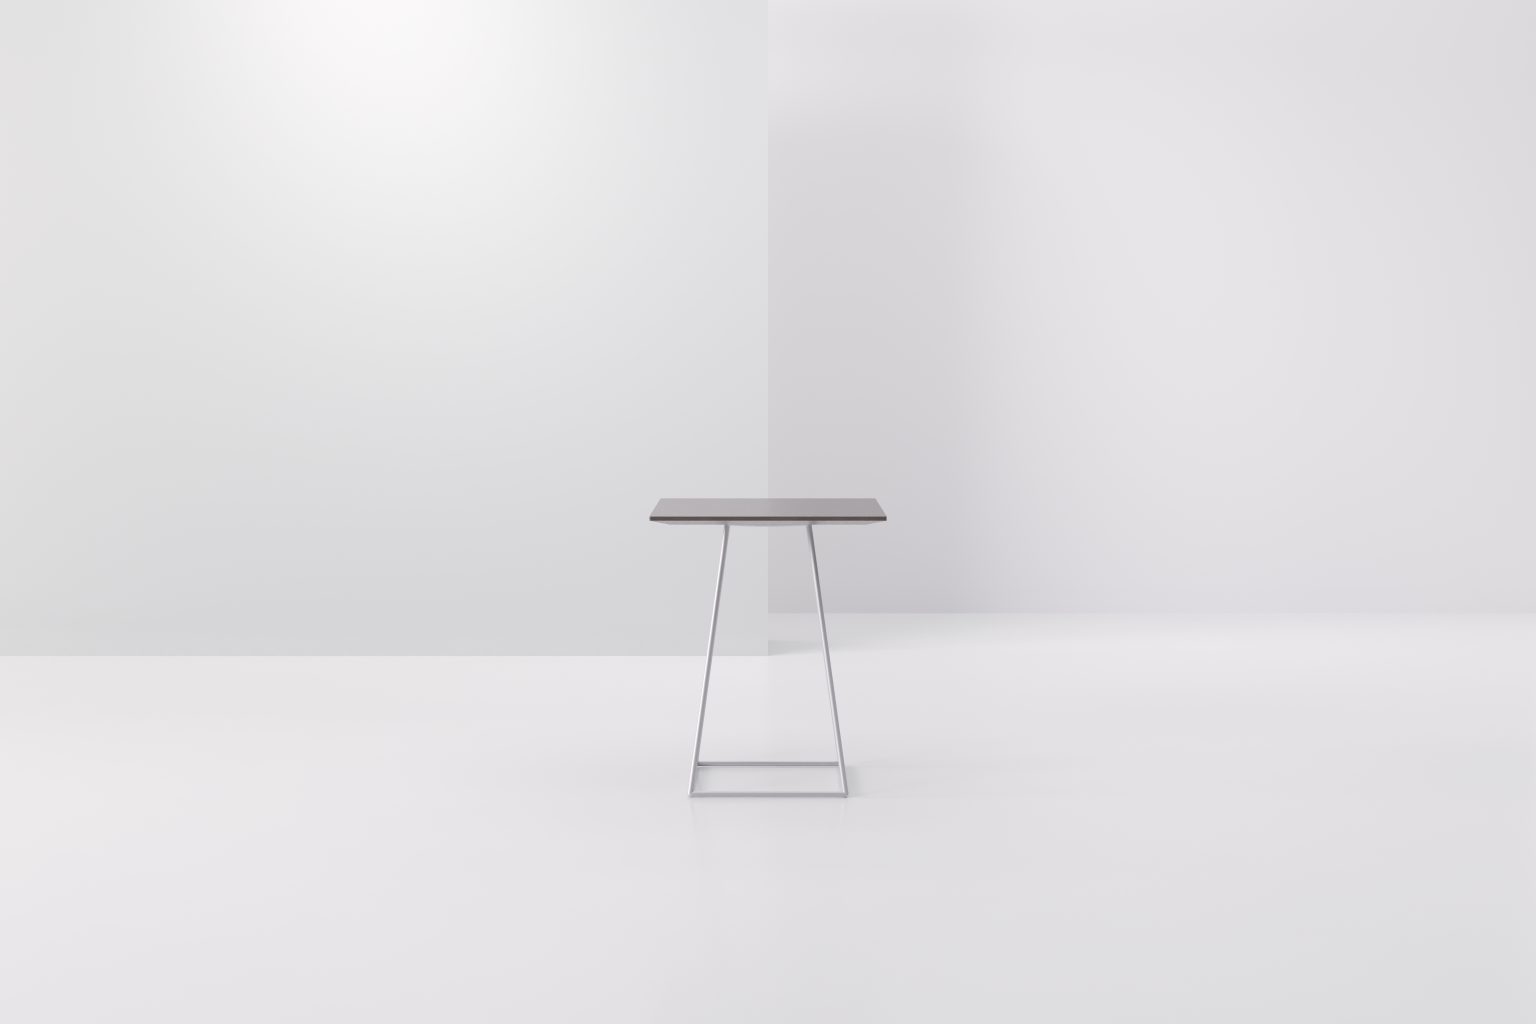 Dayton Small Square End Table Product Image 2